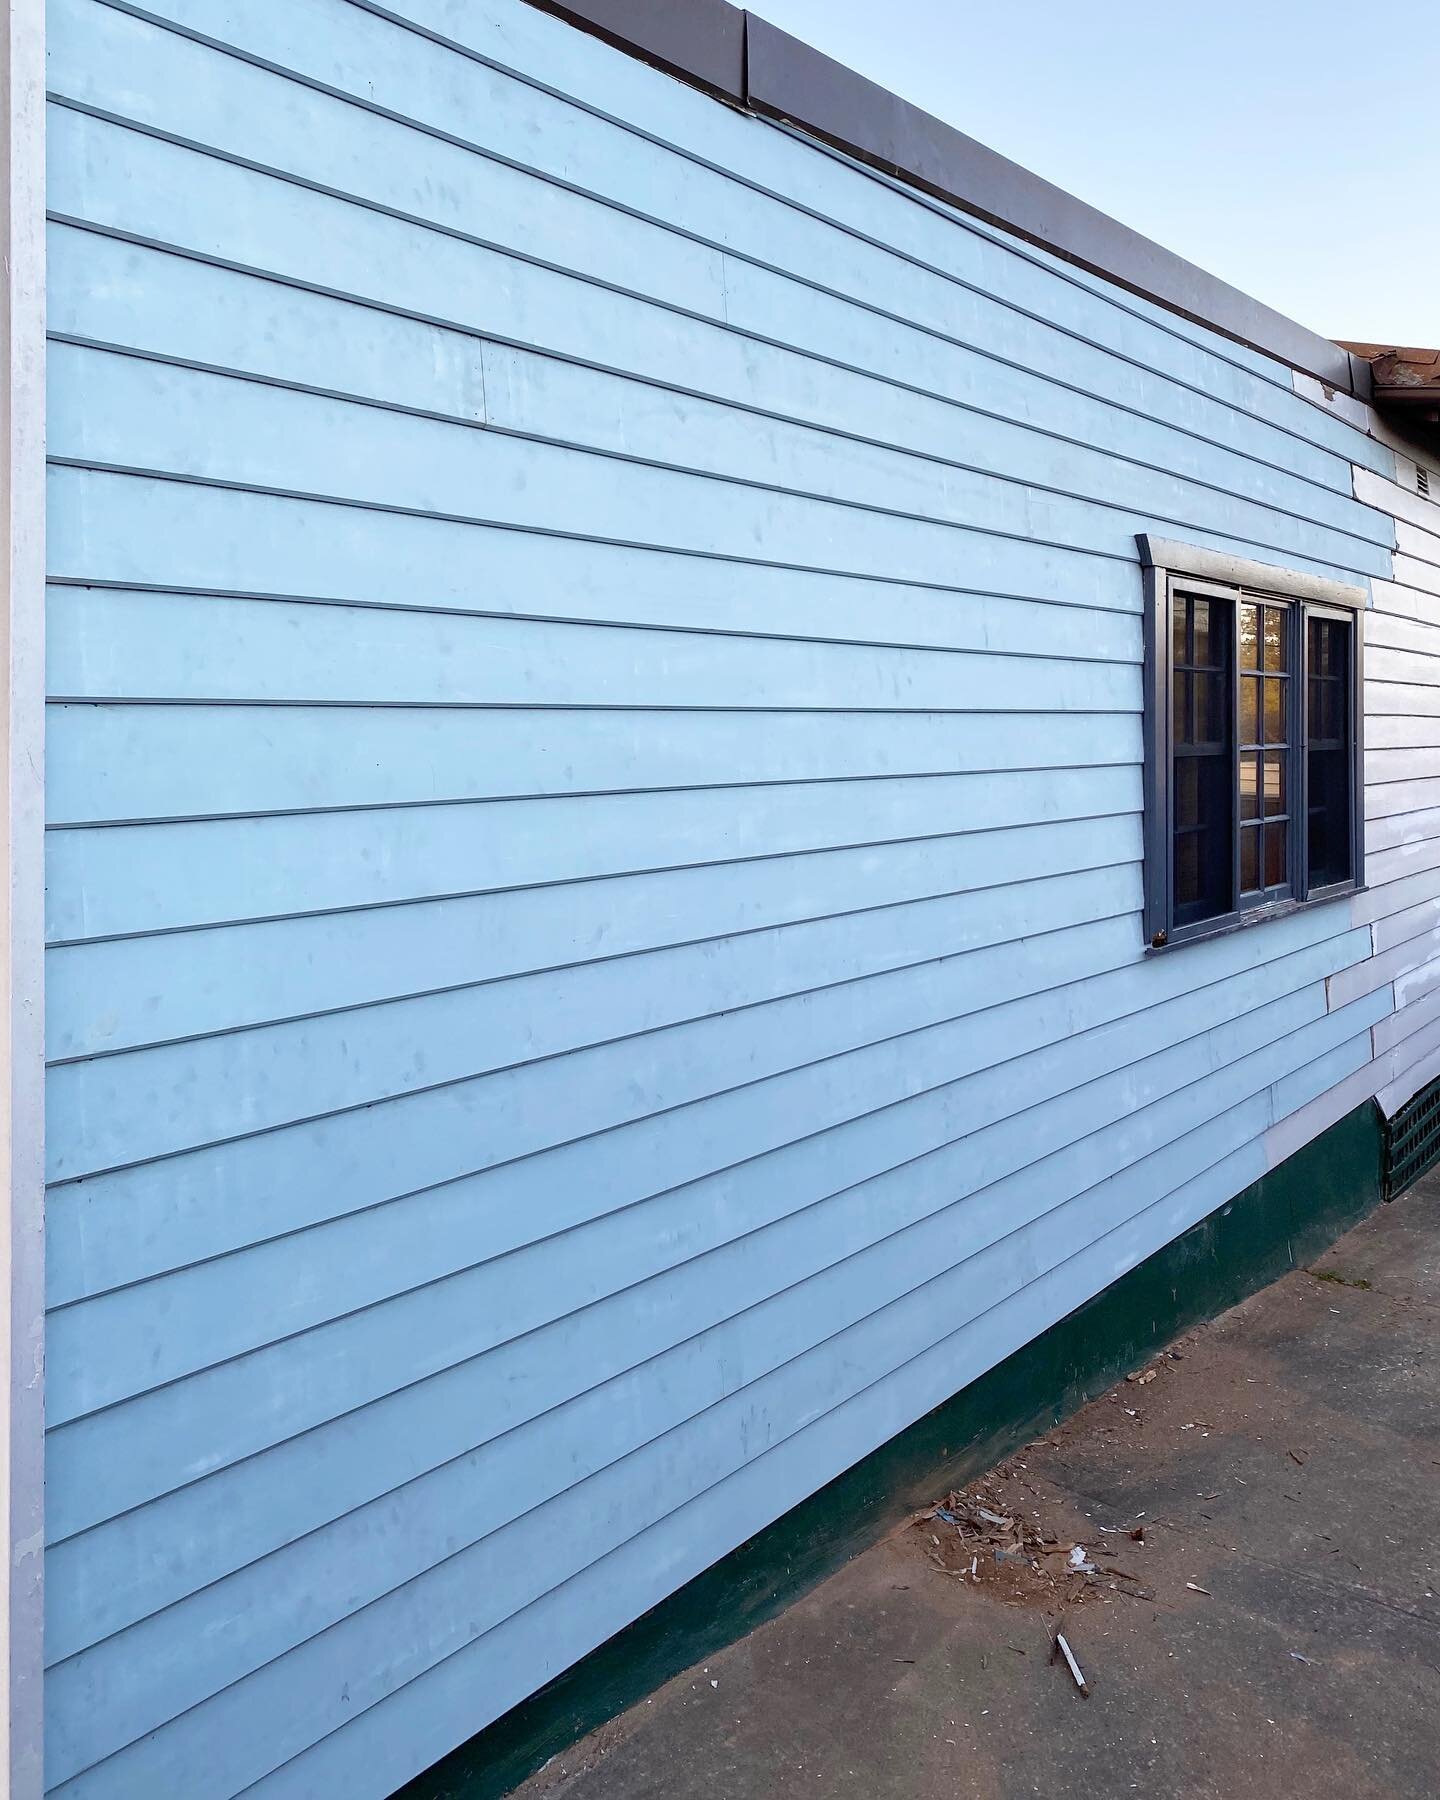 Old, damaged cladding originally installed in the 80s in much need of replacement at this home in Greenacre⁣
⁣
Damaged cladding was removed and replaced to bring this house back to its original state! Now ready for sanding and painting⁣
⁣
👈🏼 Swipe 